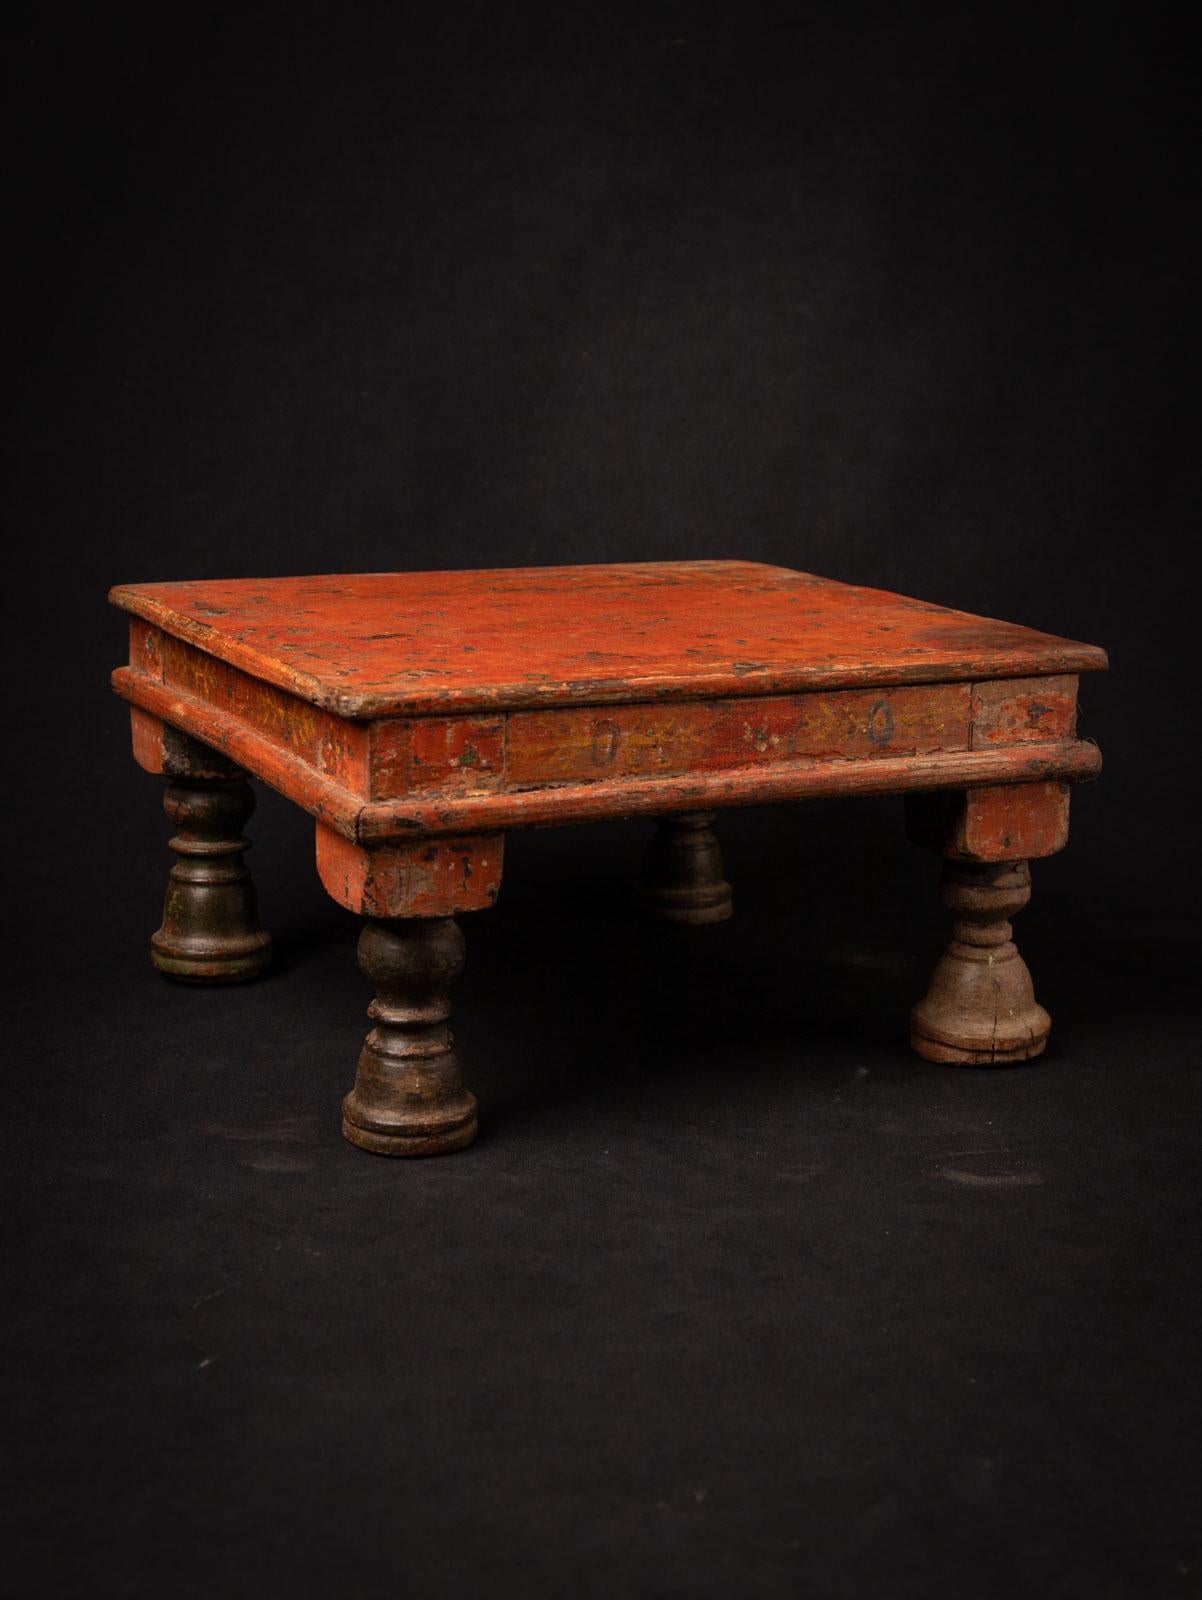 19th century Antique Indian wooden shrine / table from India 1